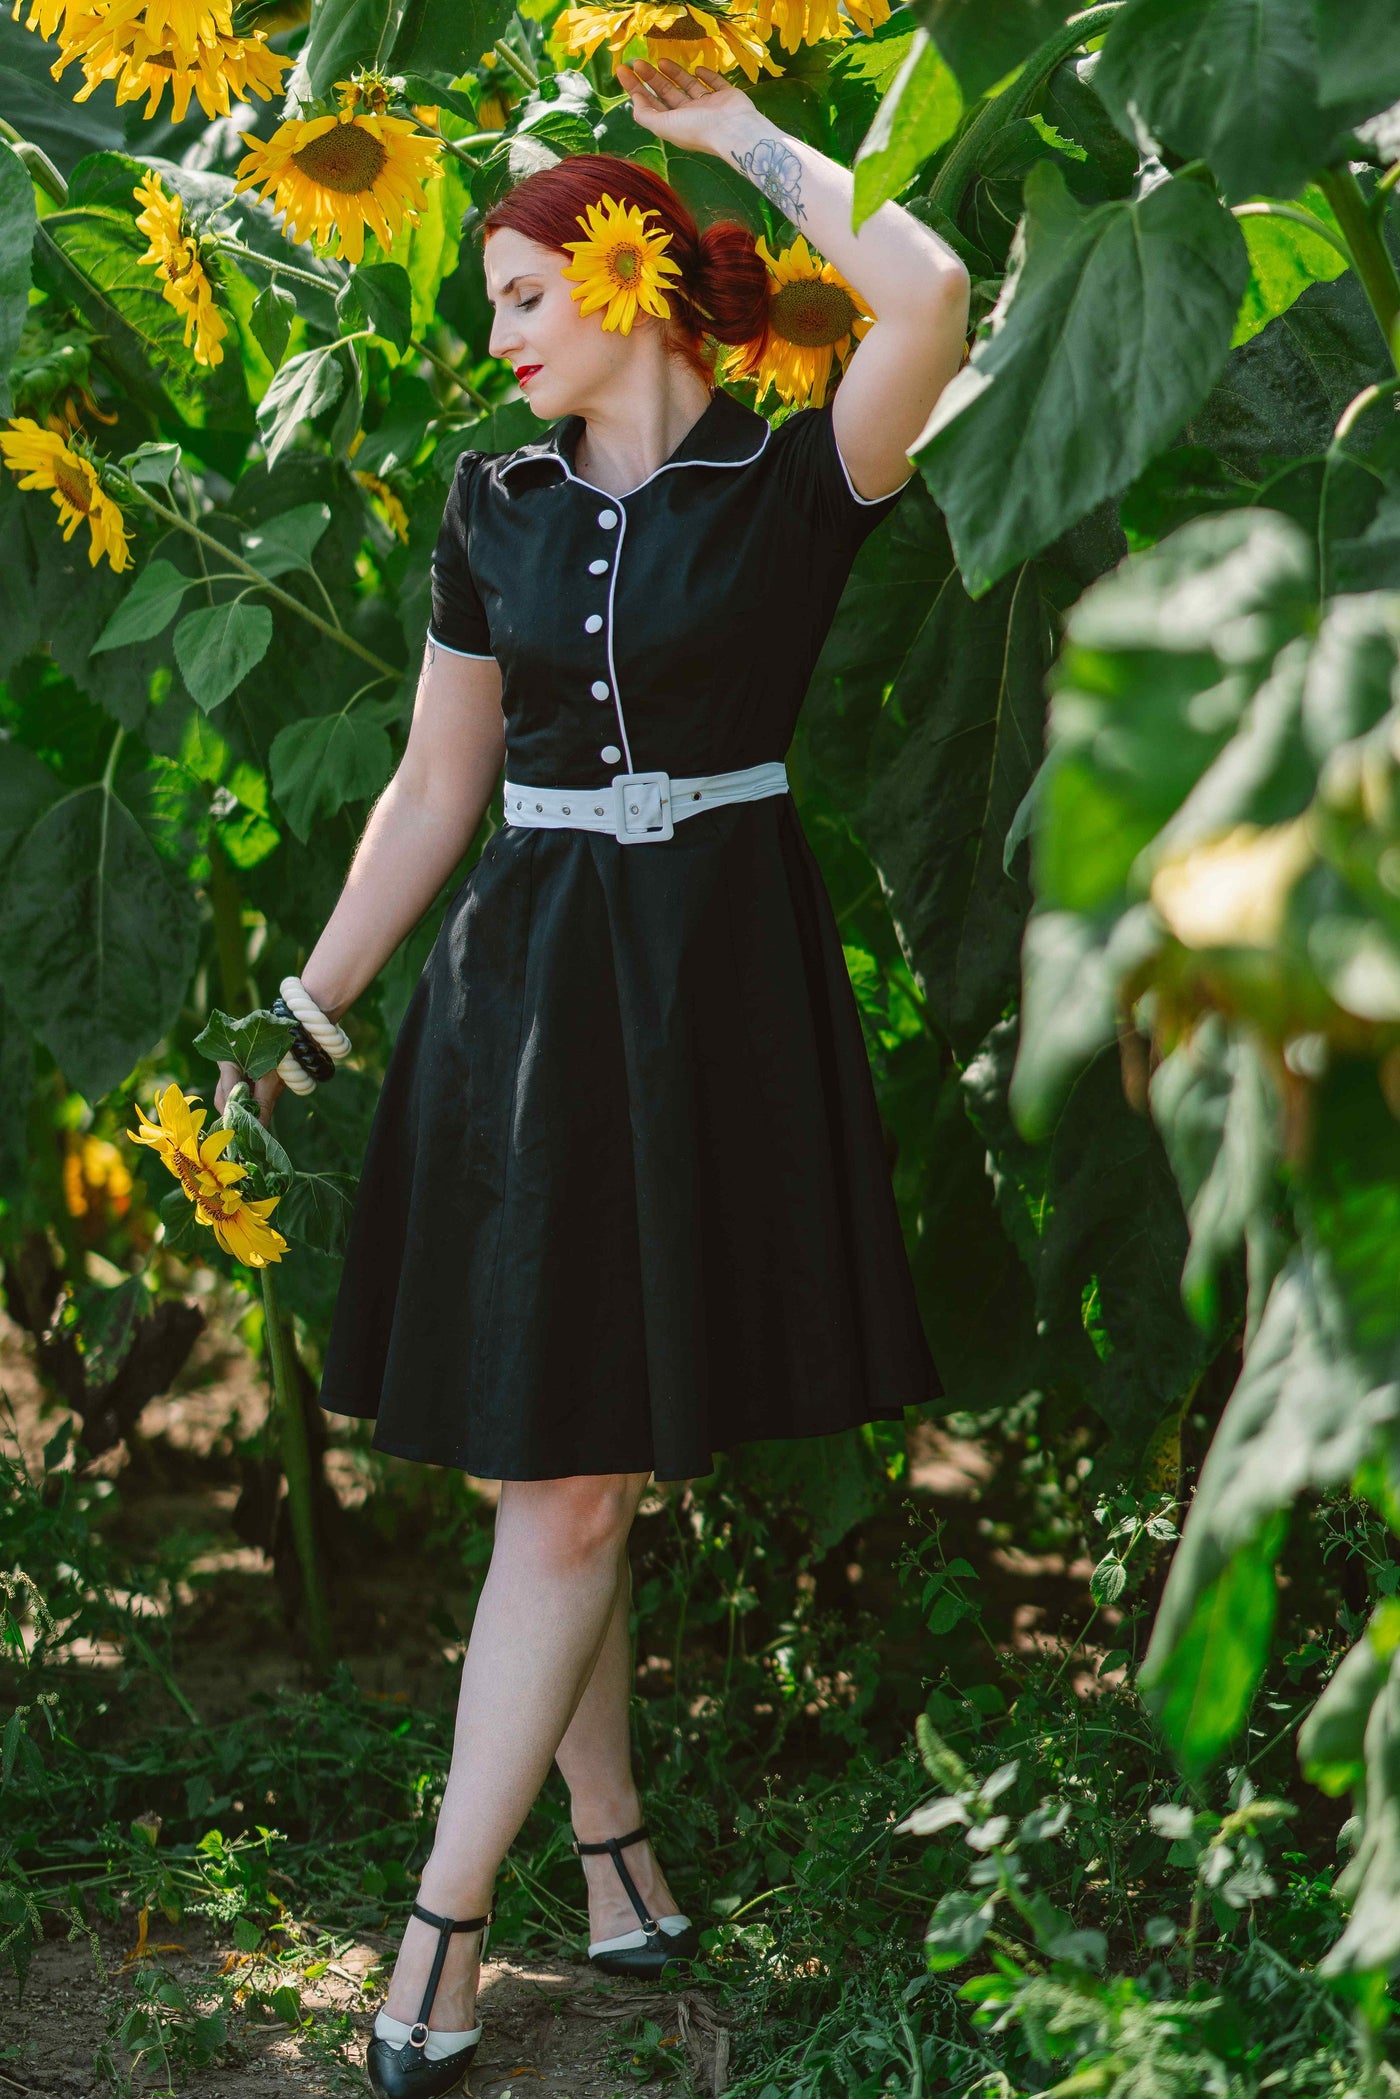 Woman wears our Short sleeve Penelope diner button top dress, in black and white, in a field of sunflowers